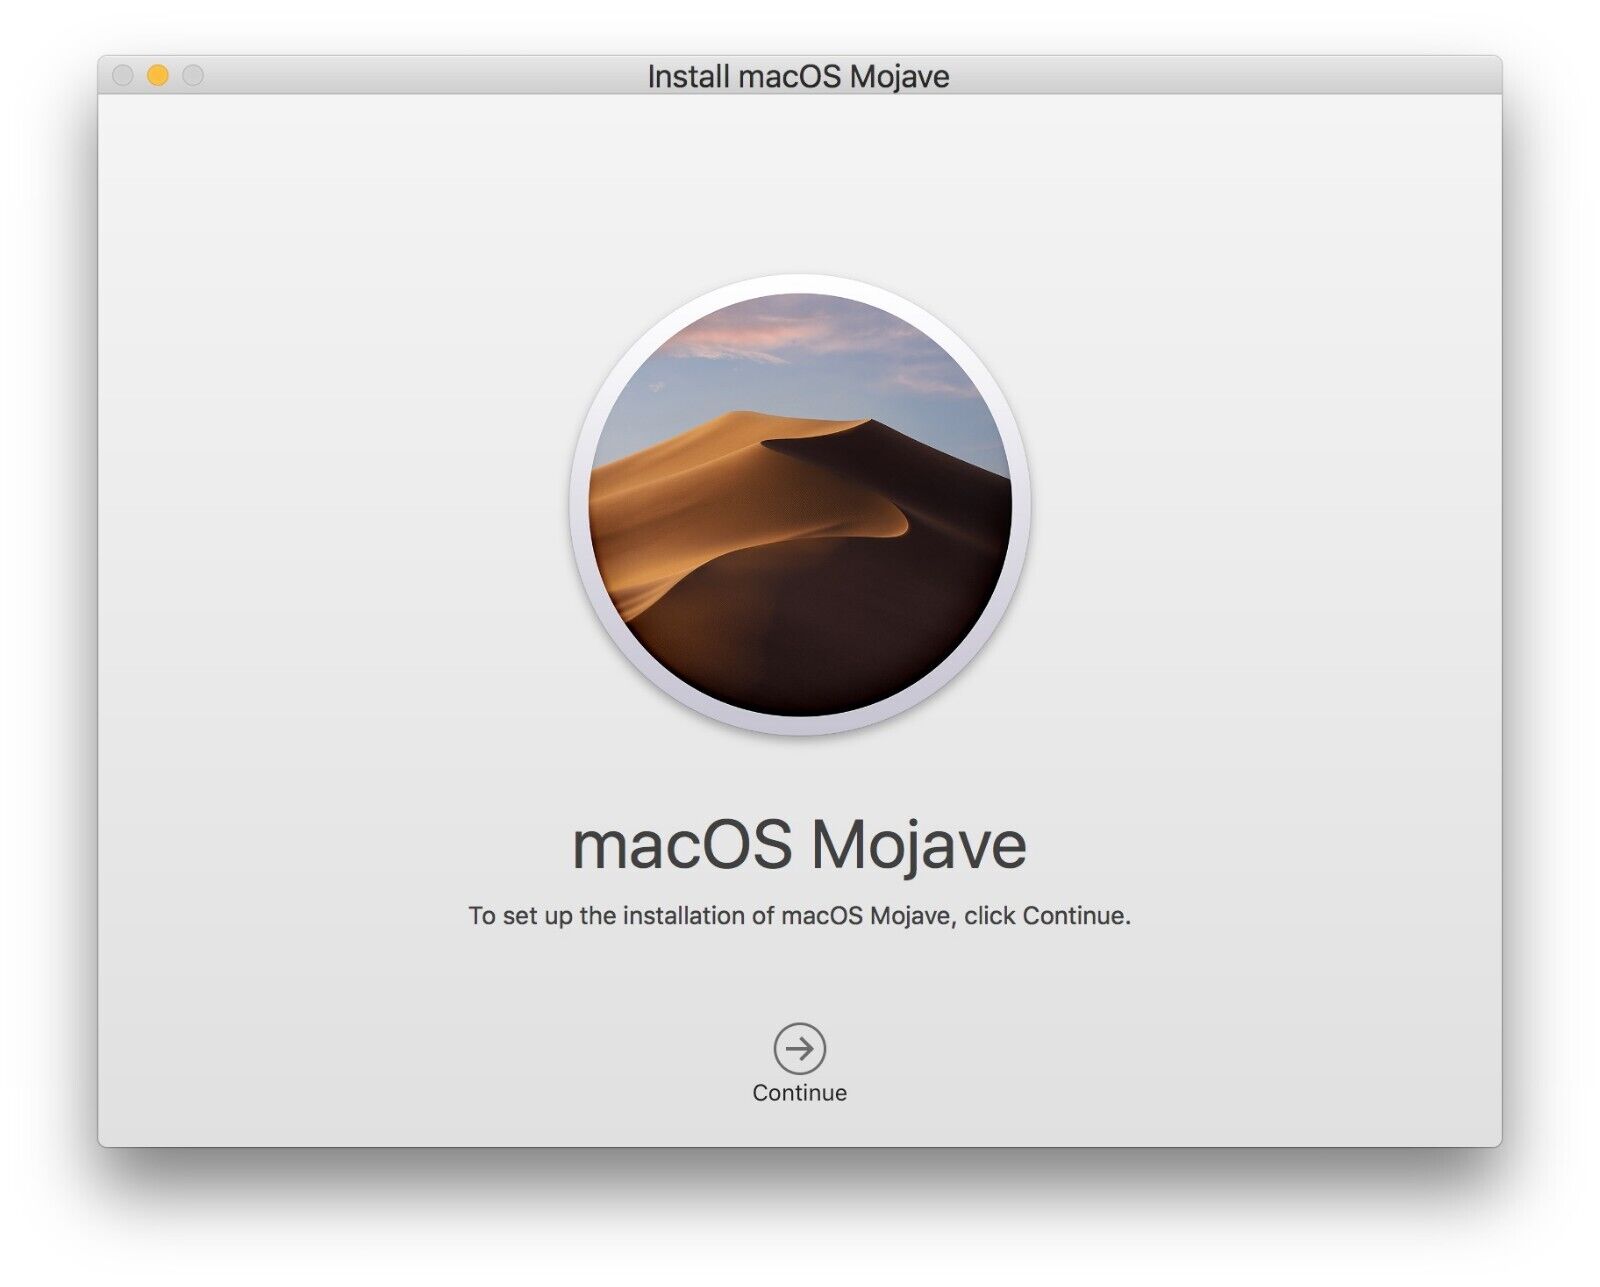 MacOS Bootable USB Mojave (10.14.6) Installer Restore/Recovery Drive